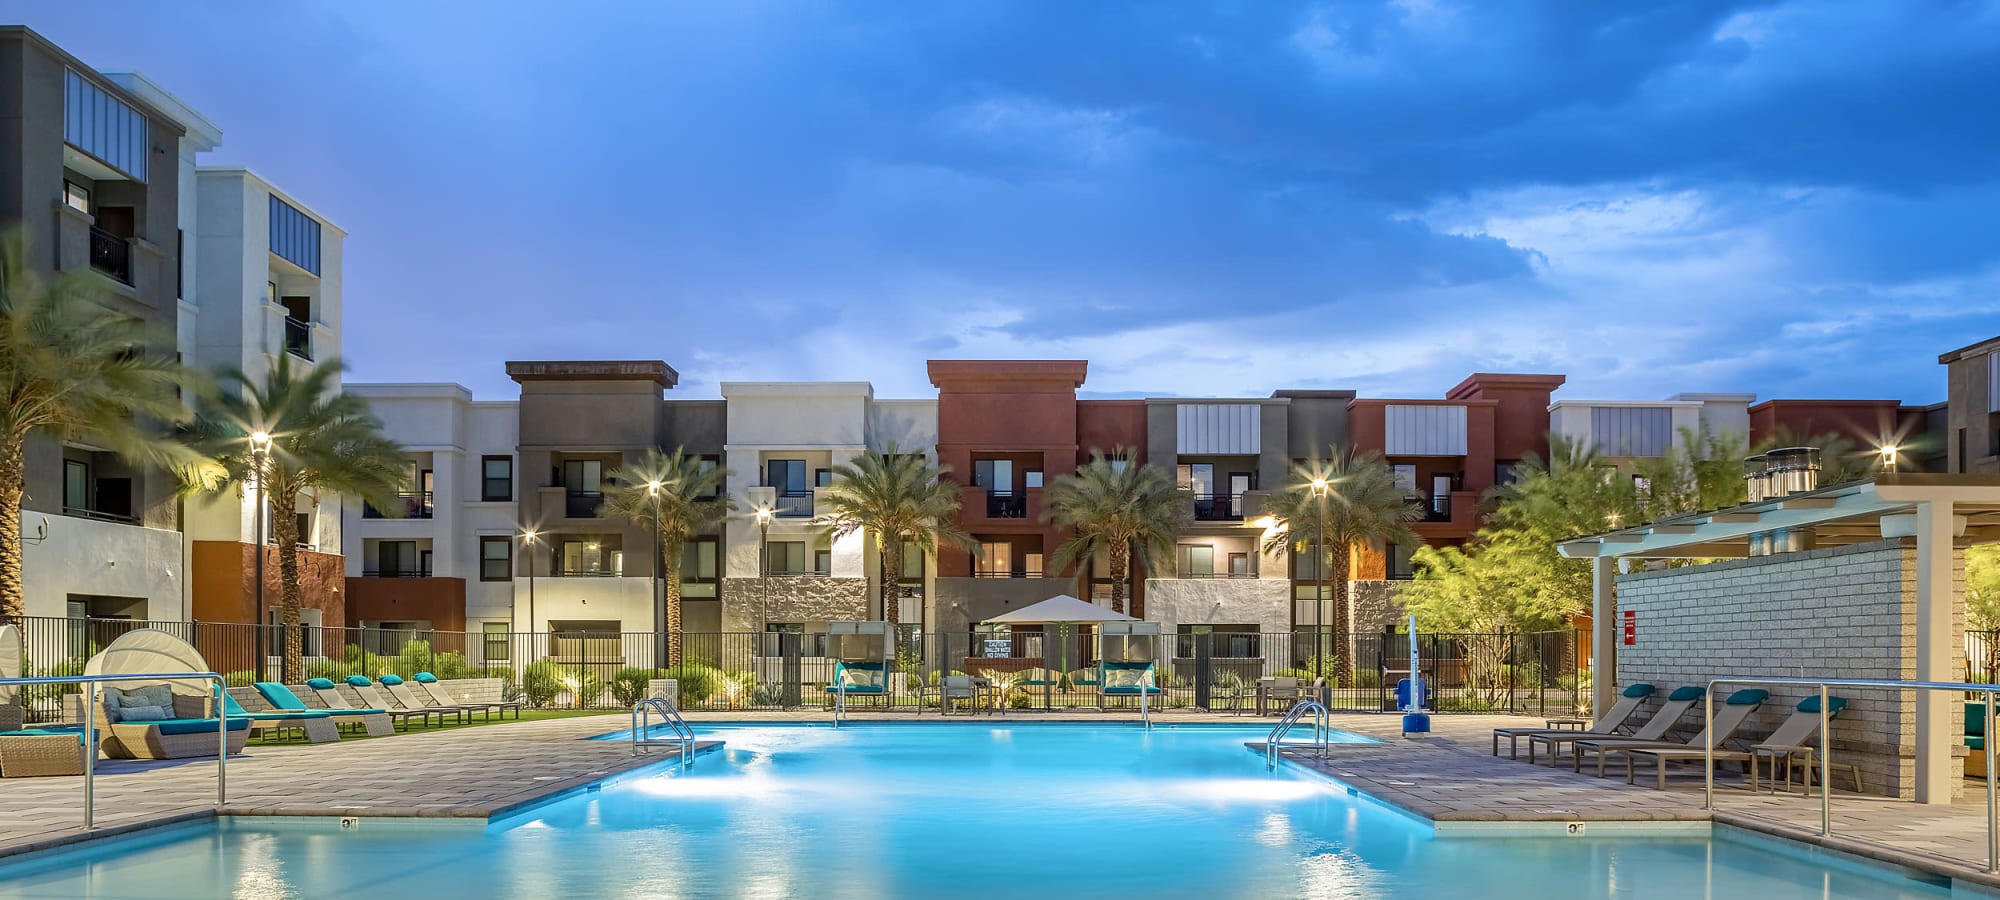 Apply to live at Marquis at Chandler in Chandler, Arizona